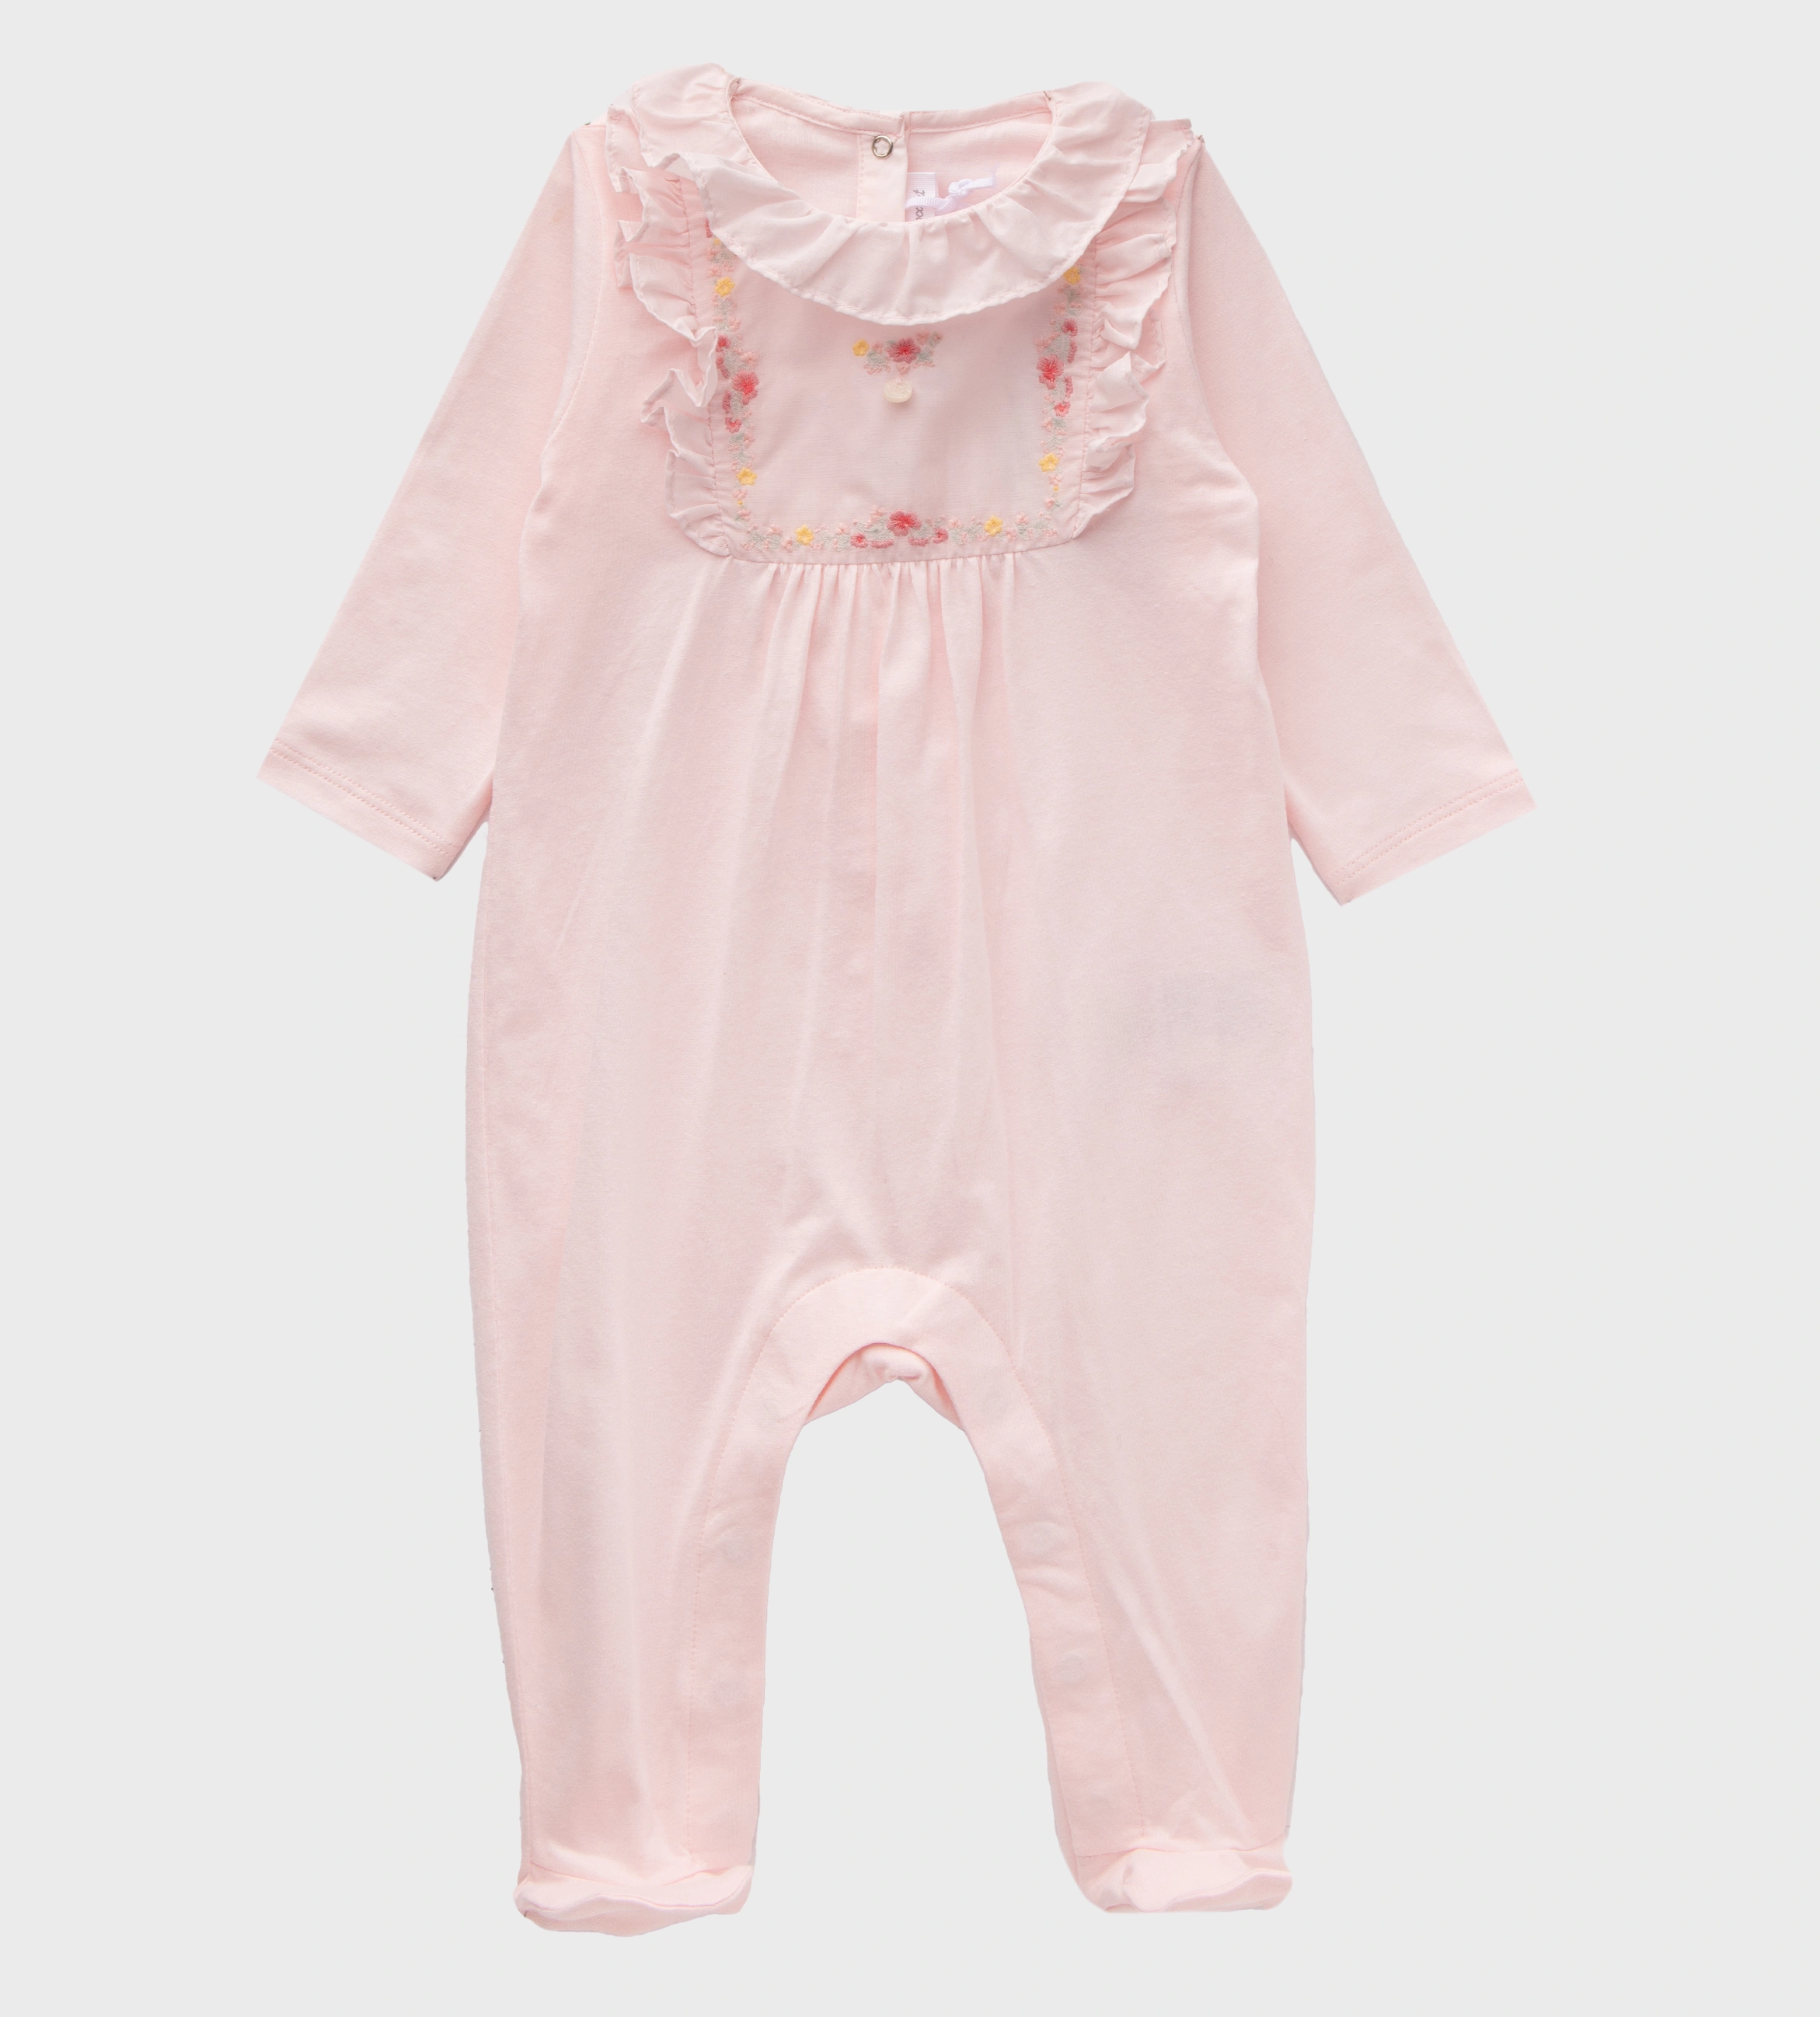 Babysuit with Ruffles Pink